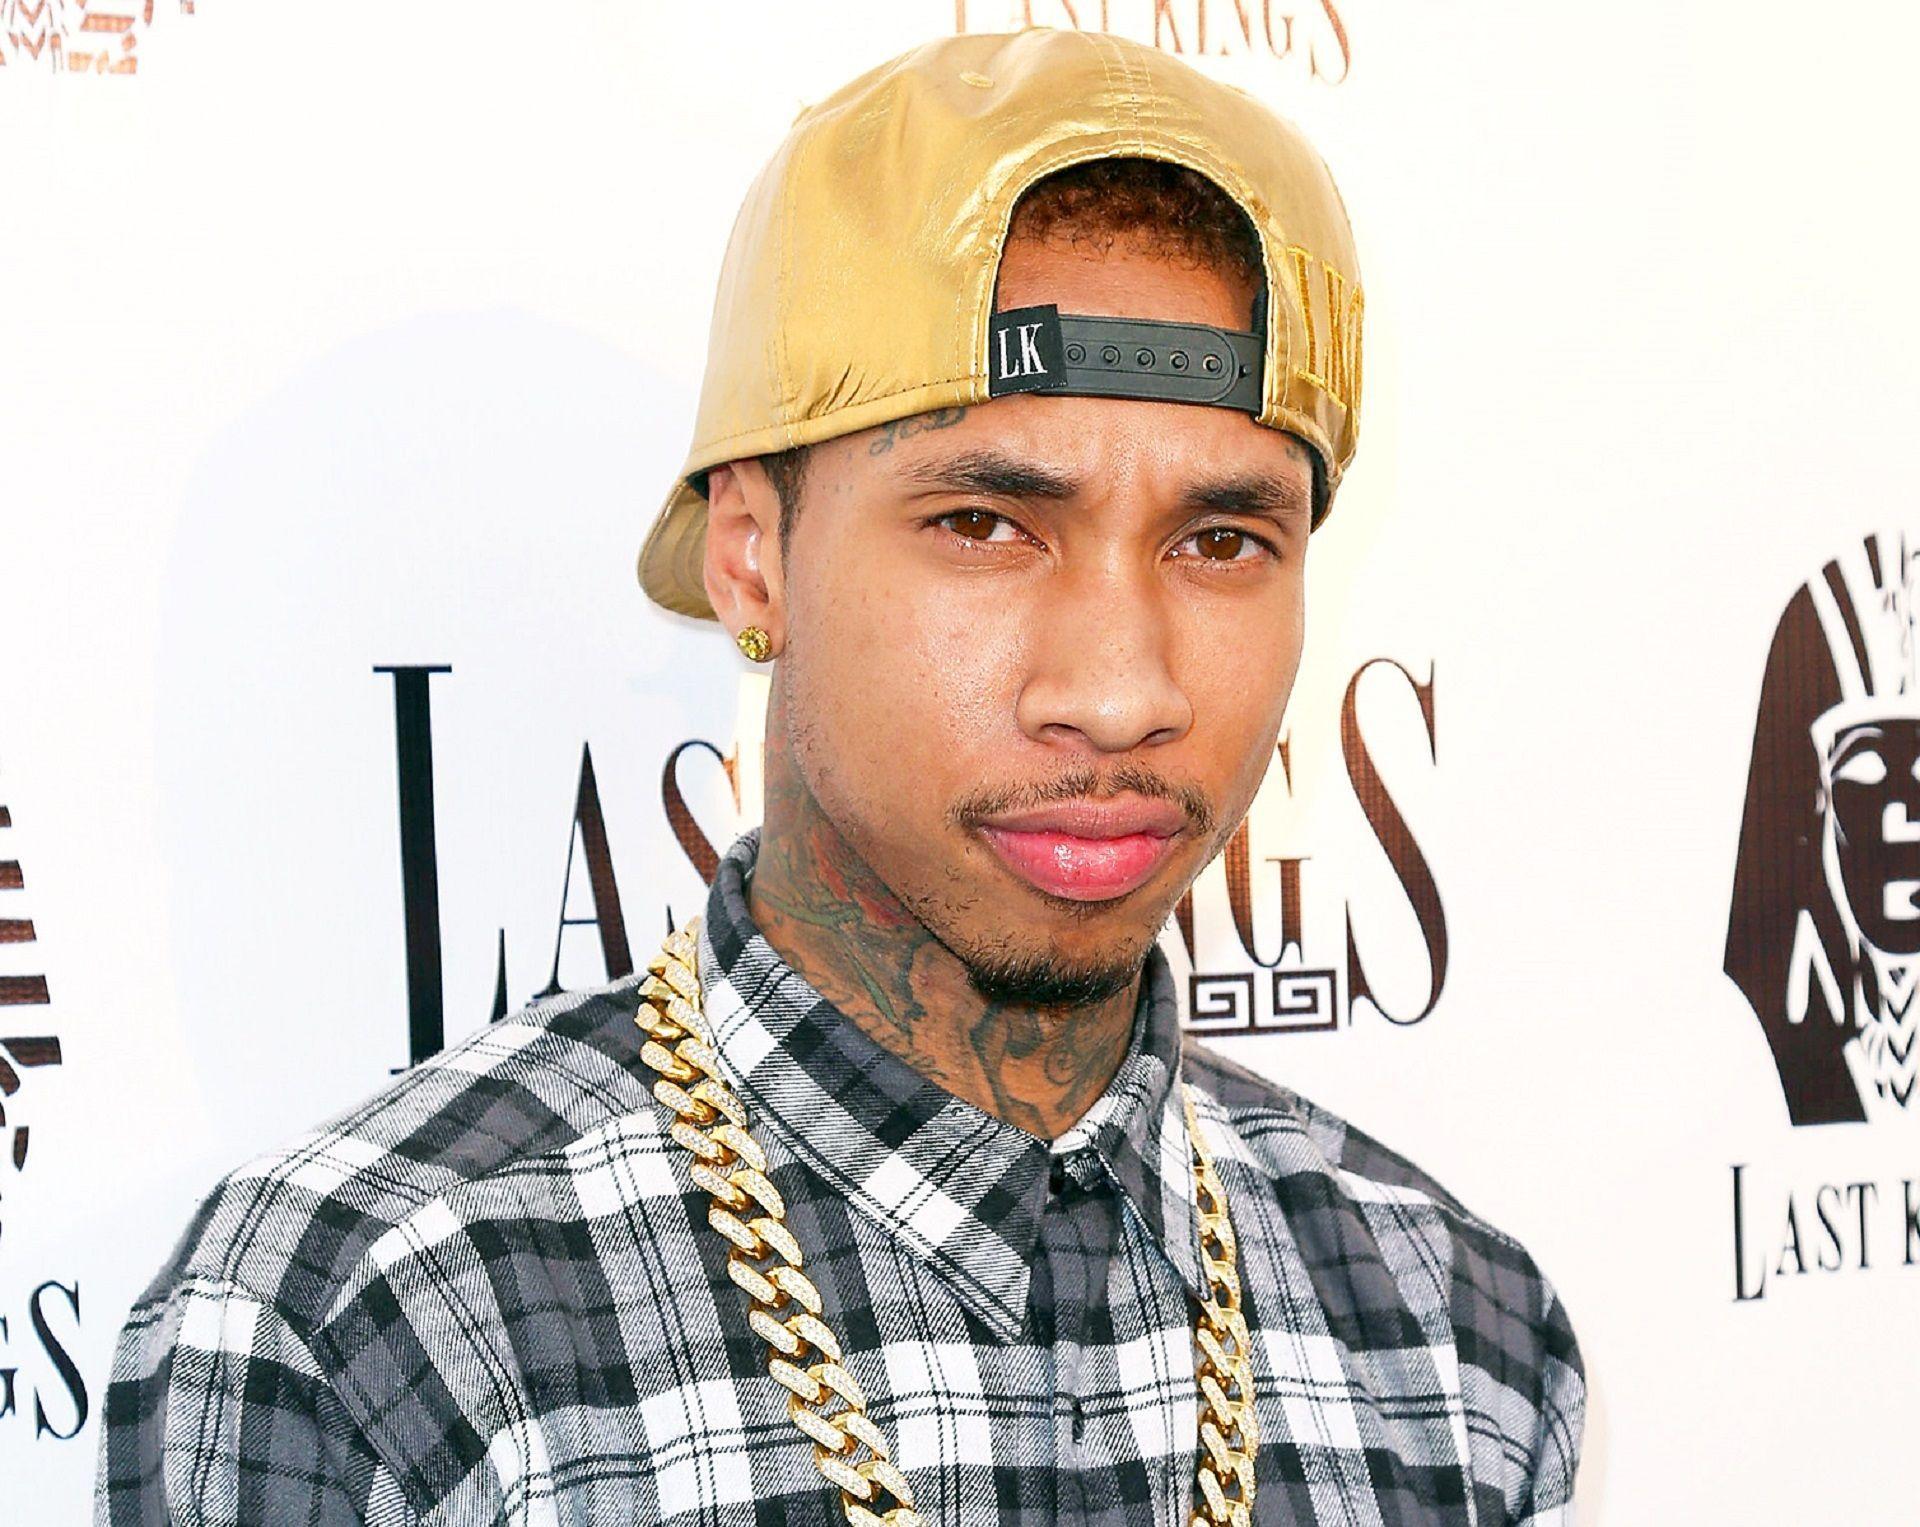 Keyword: Tyga - HD Wallpapers and Background Images.